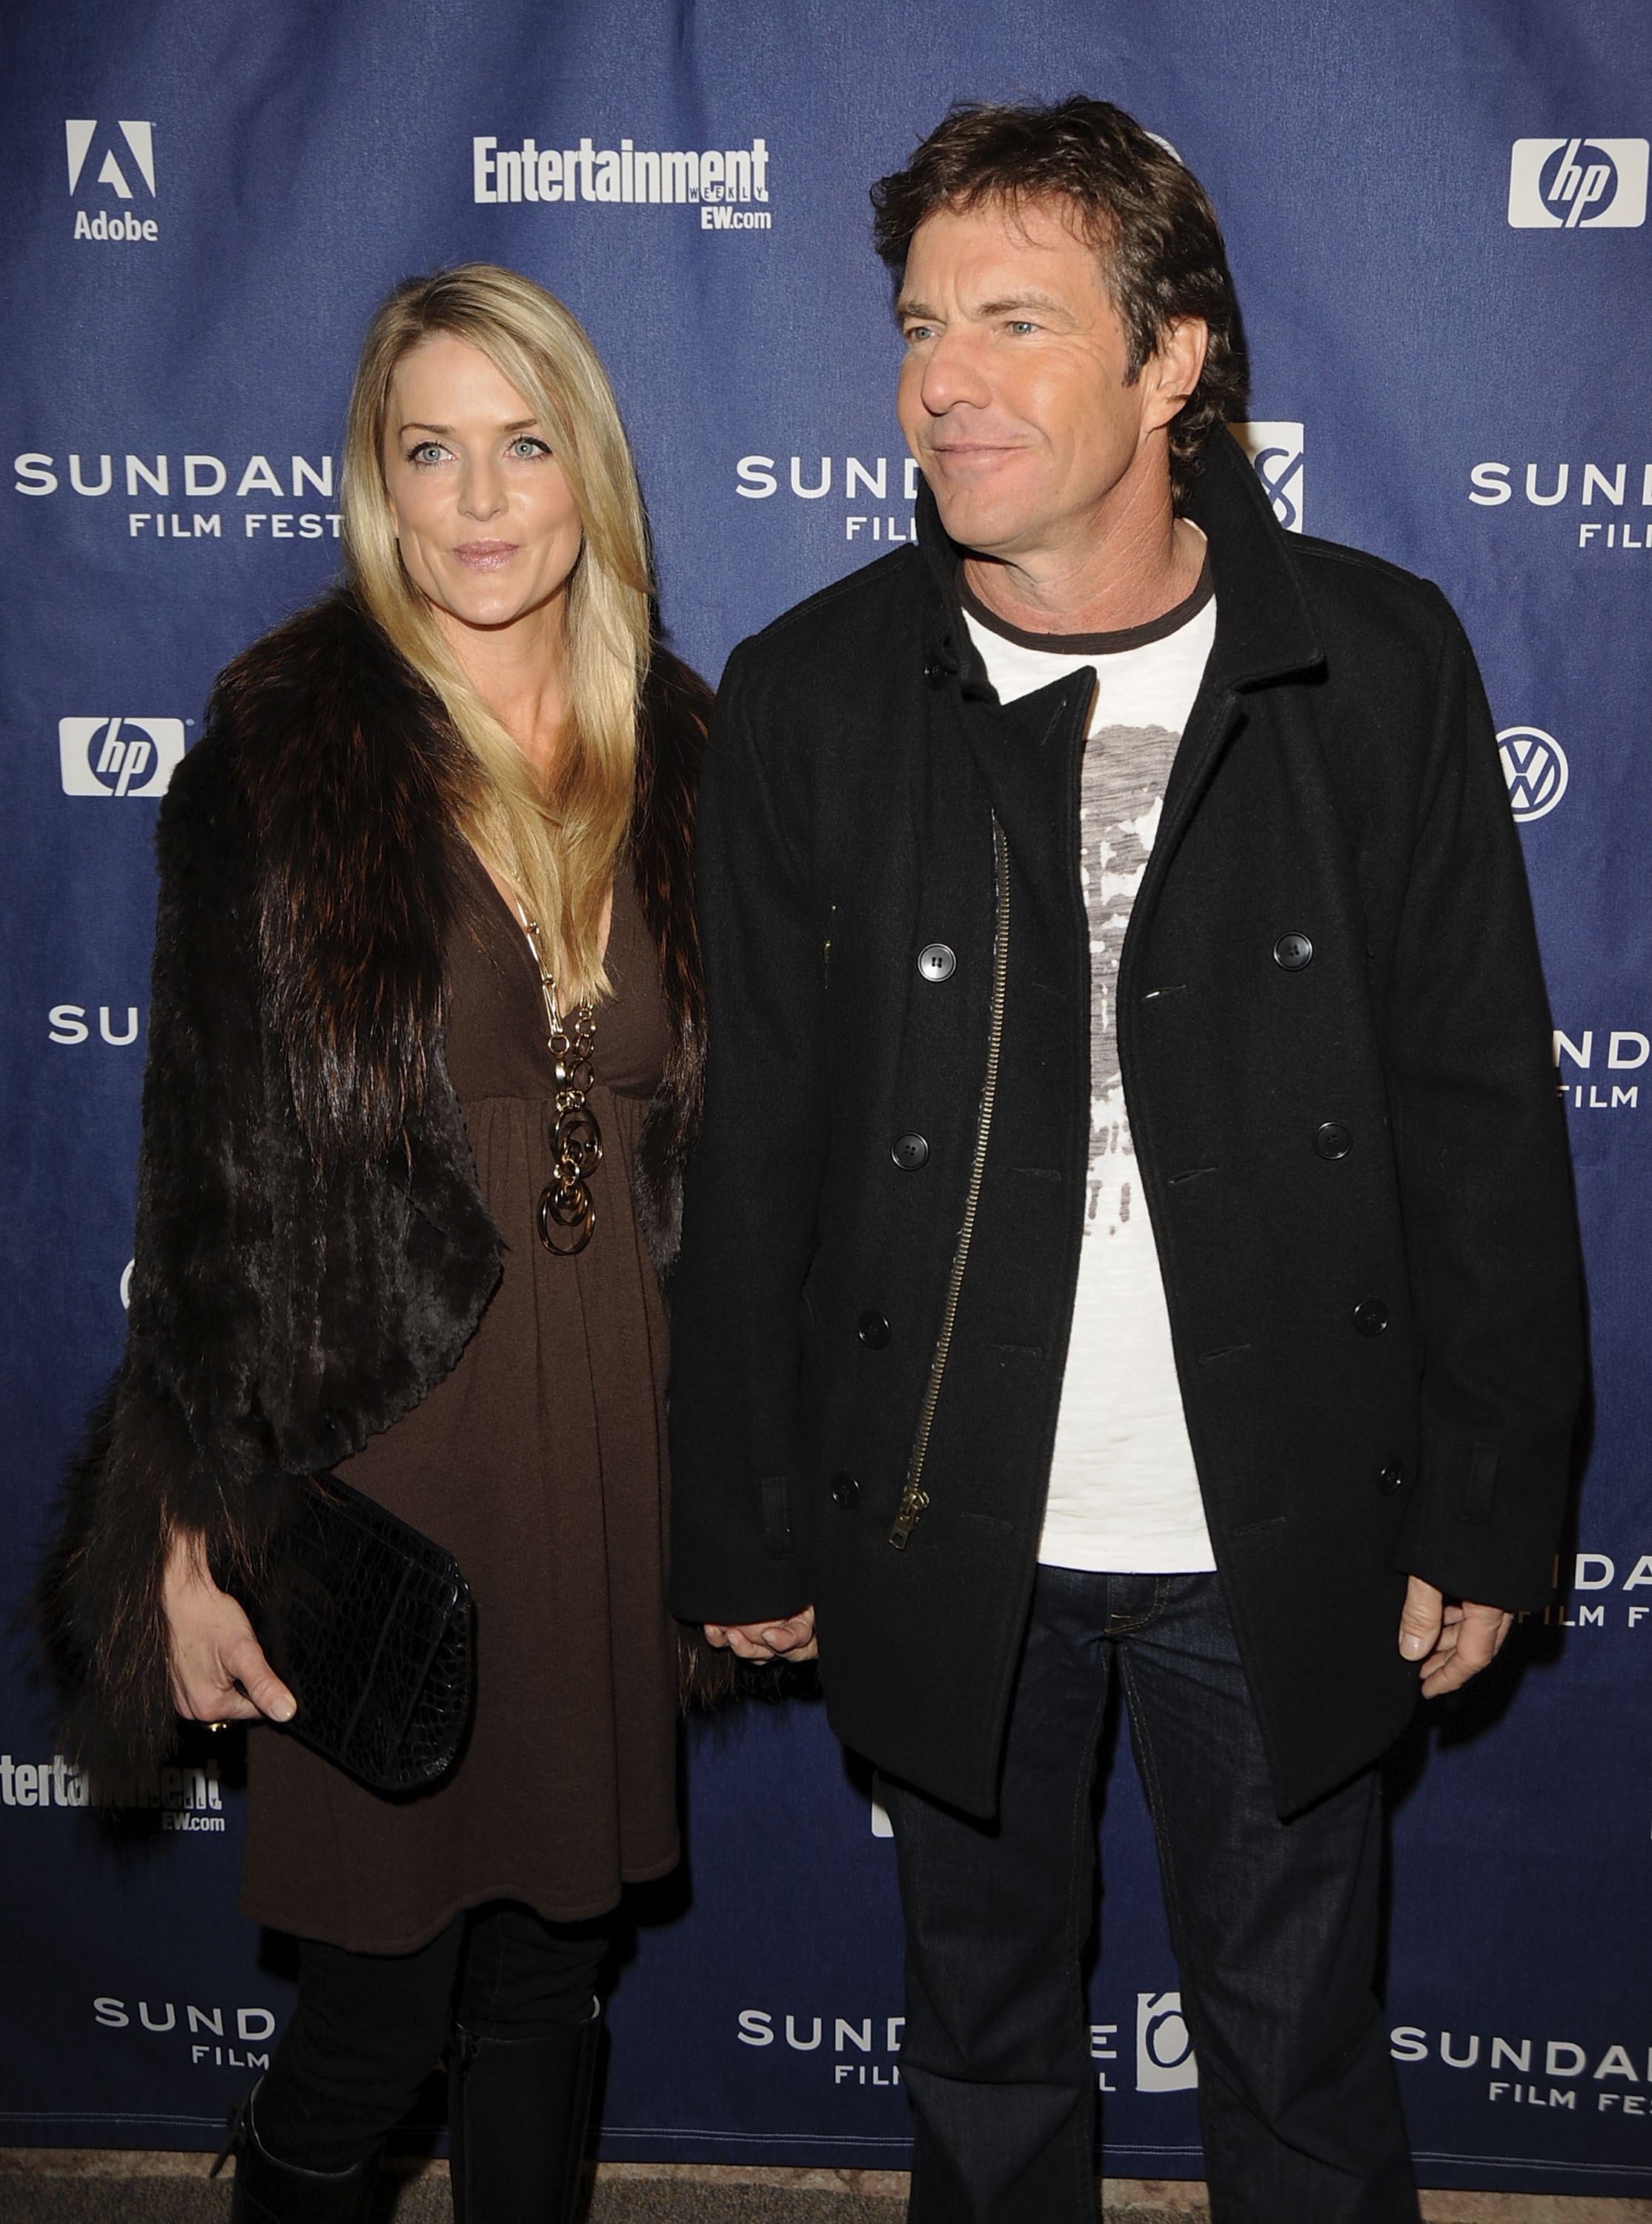 Dennis Quaid and Kimberly Buffington attend the Sundance Film Festival on January 27, 2008 | Source: Getty Images